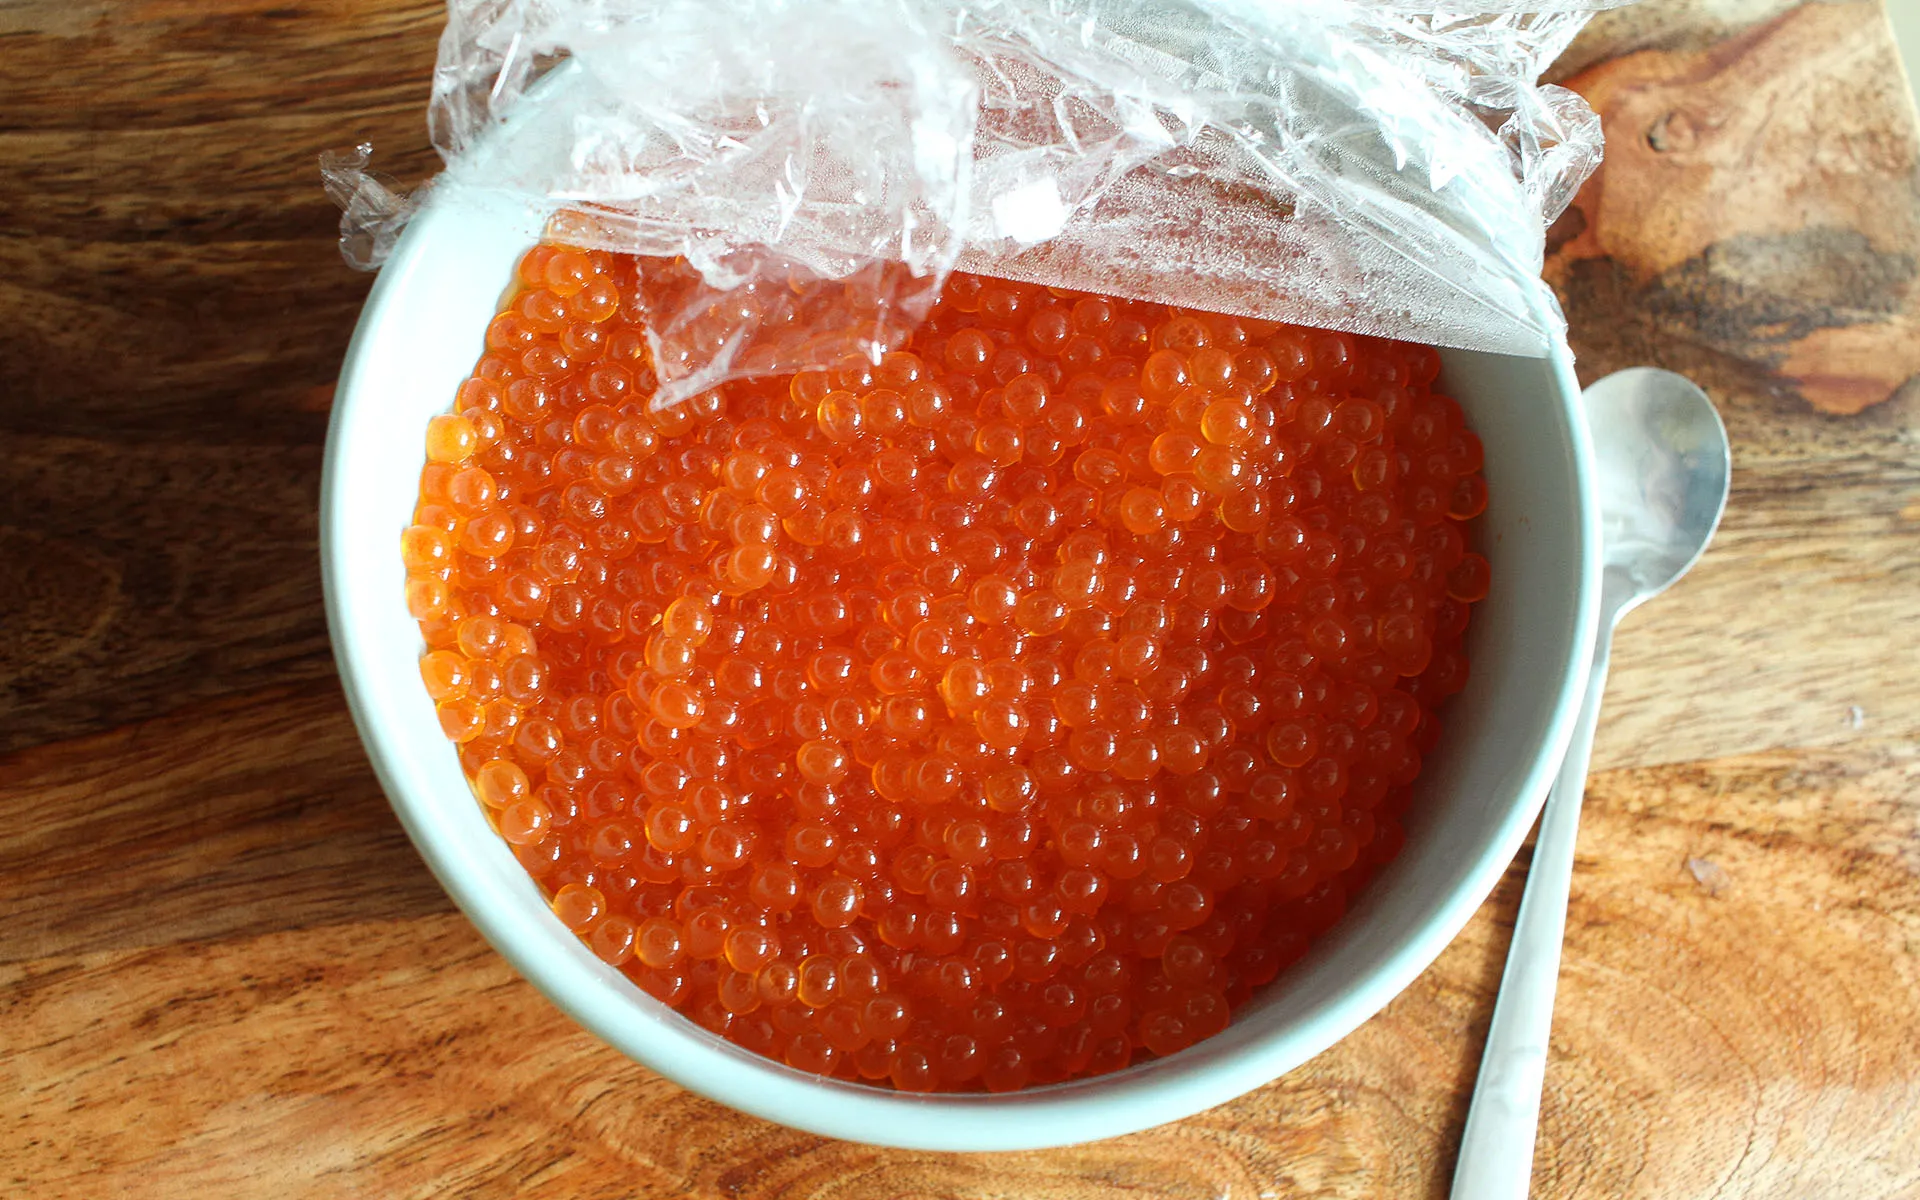 Vivid red salmon roe eggs in a stainless bowl on a wooden benchtop.